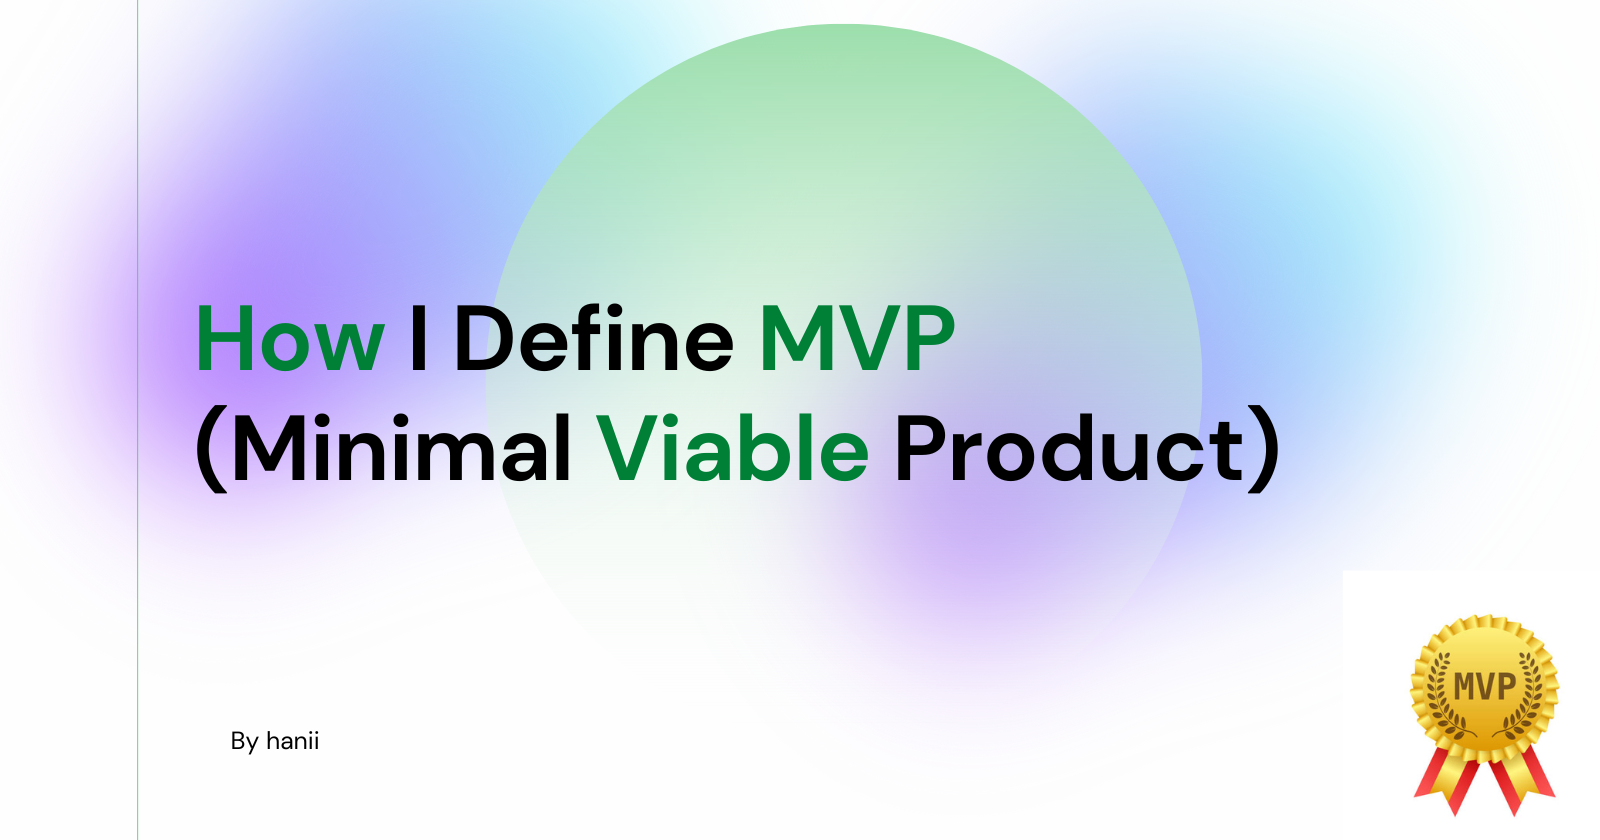 Setting Yourself Up for Success - How I Define MVP (Minimal Viable Product)